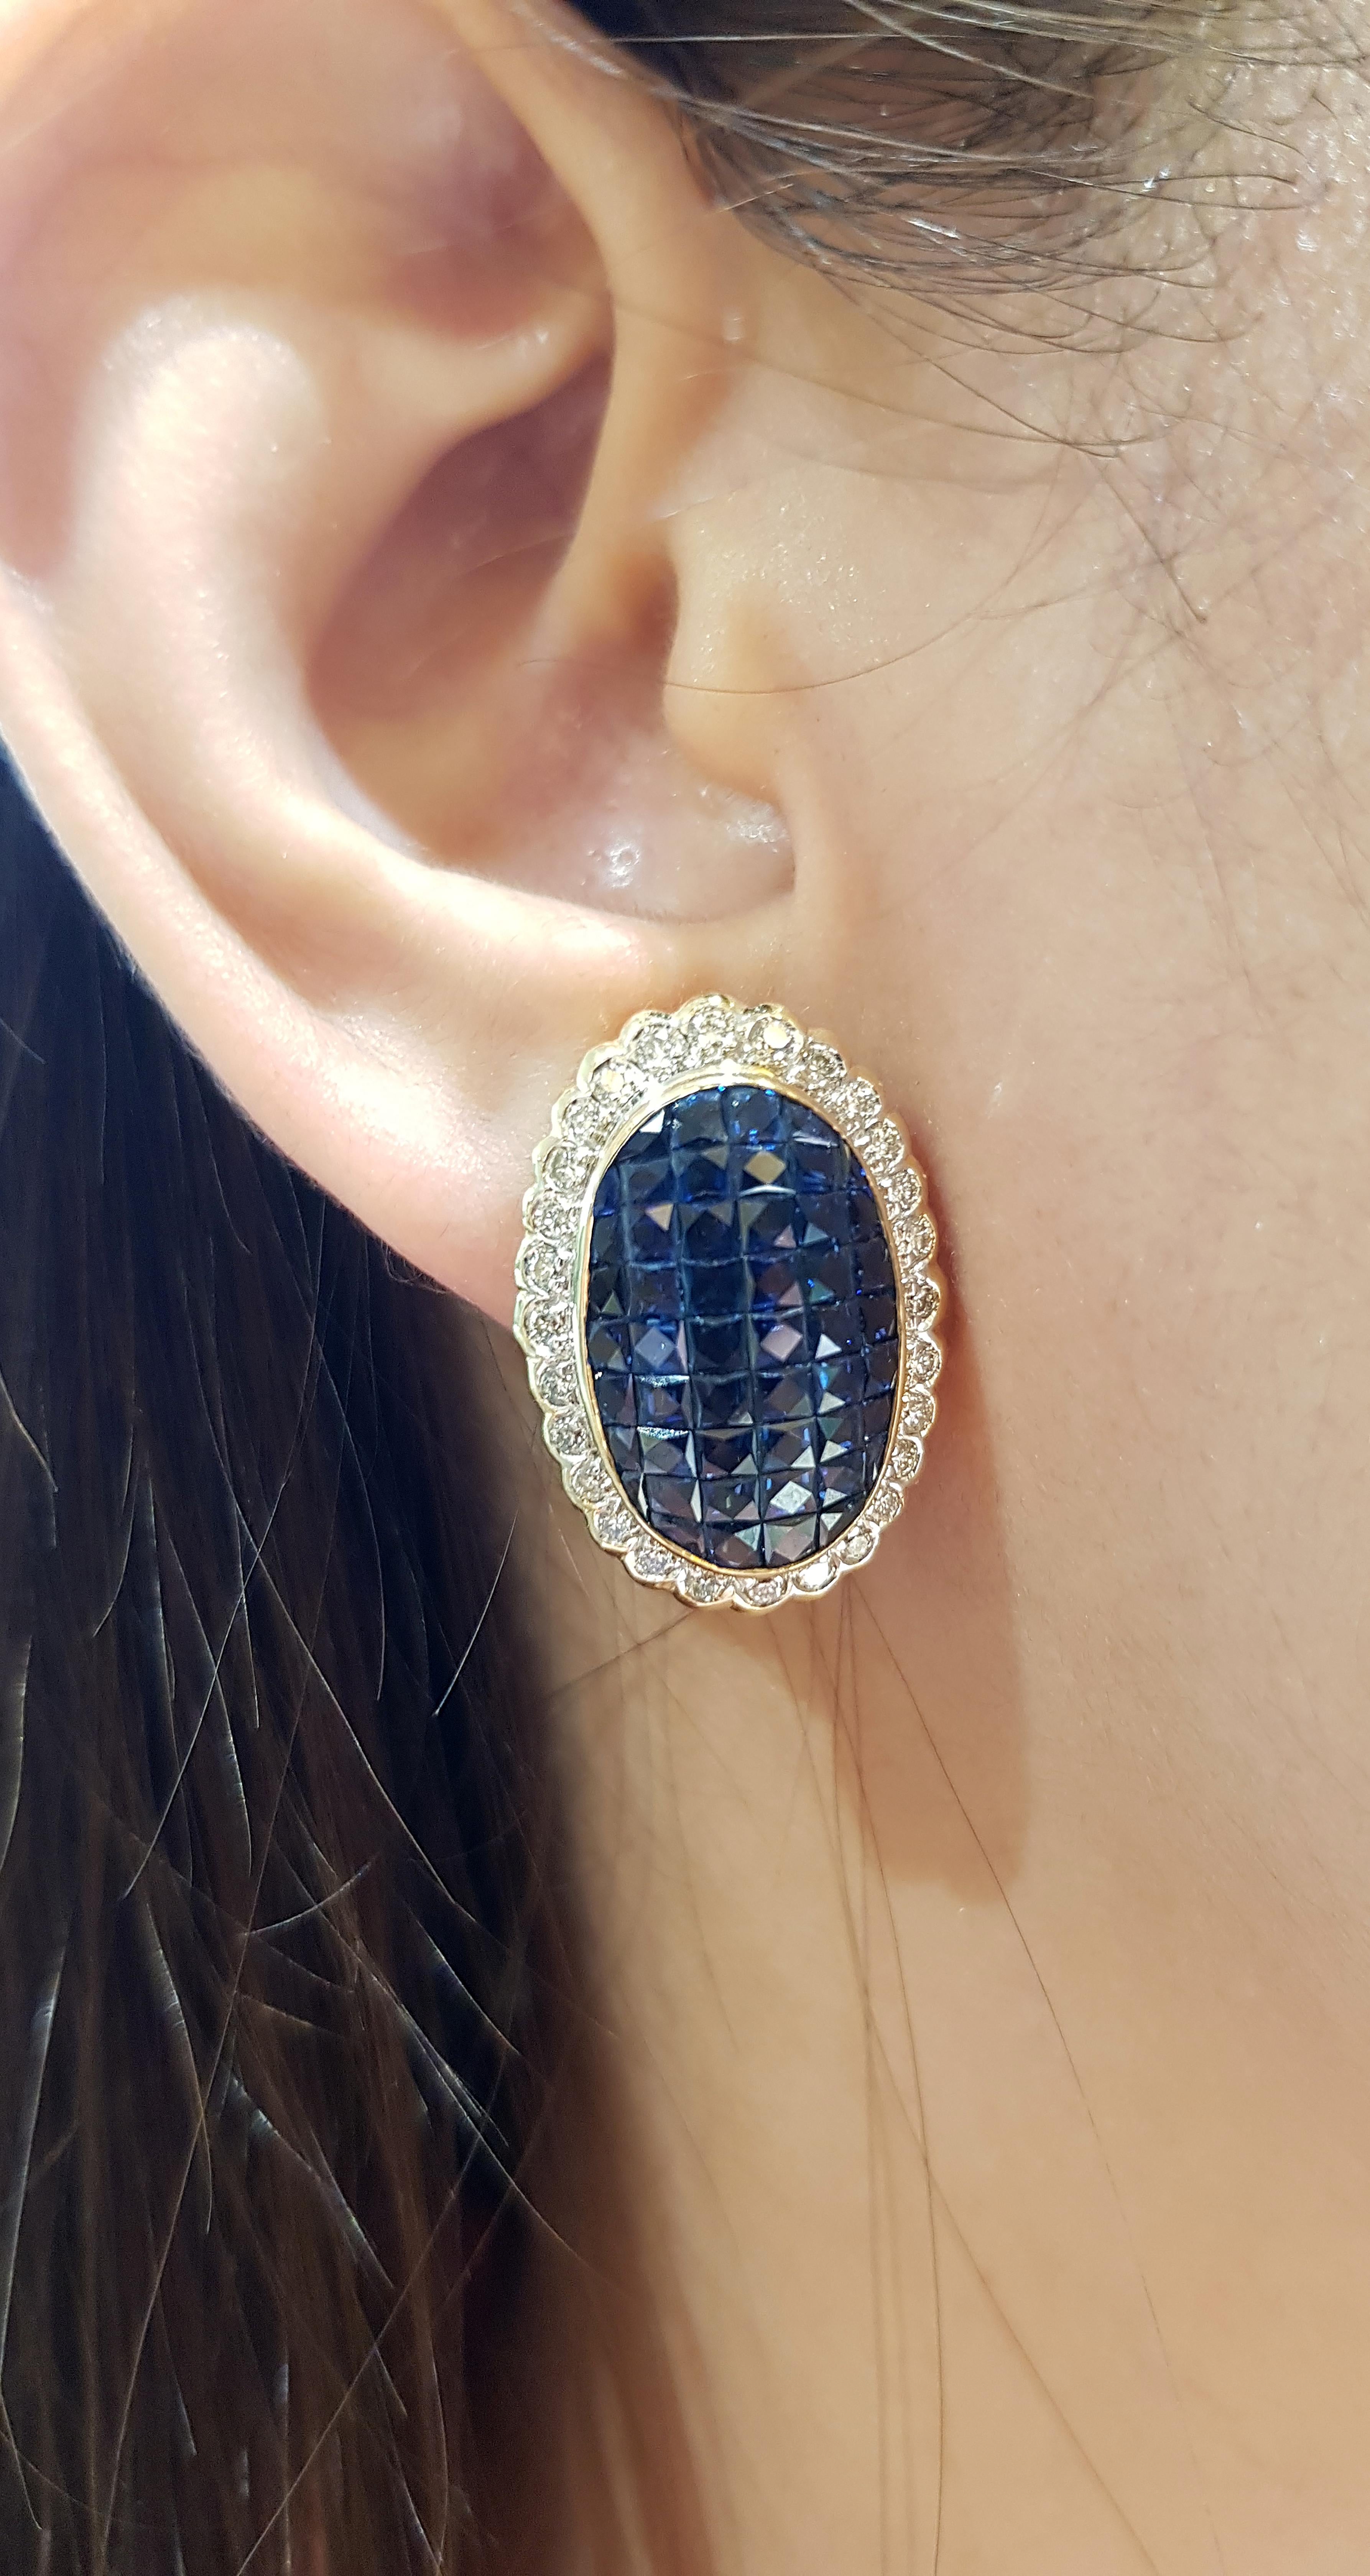 Blue Sapphire 9.09 carats with Diamond 0.99 carat Earrings set in 18 Karat Gold Settings

Width: 1.7 cm 
Length: 2.4 cm
Total Weight: 12.15 grams

